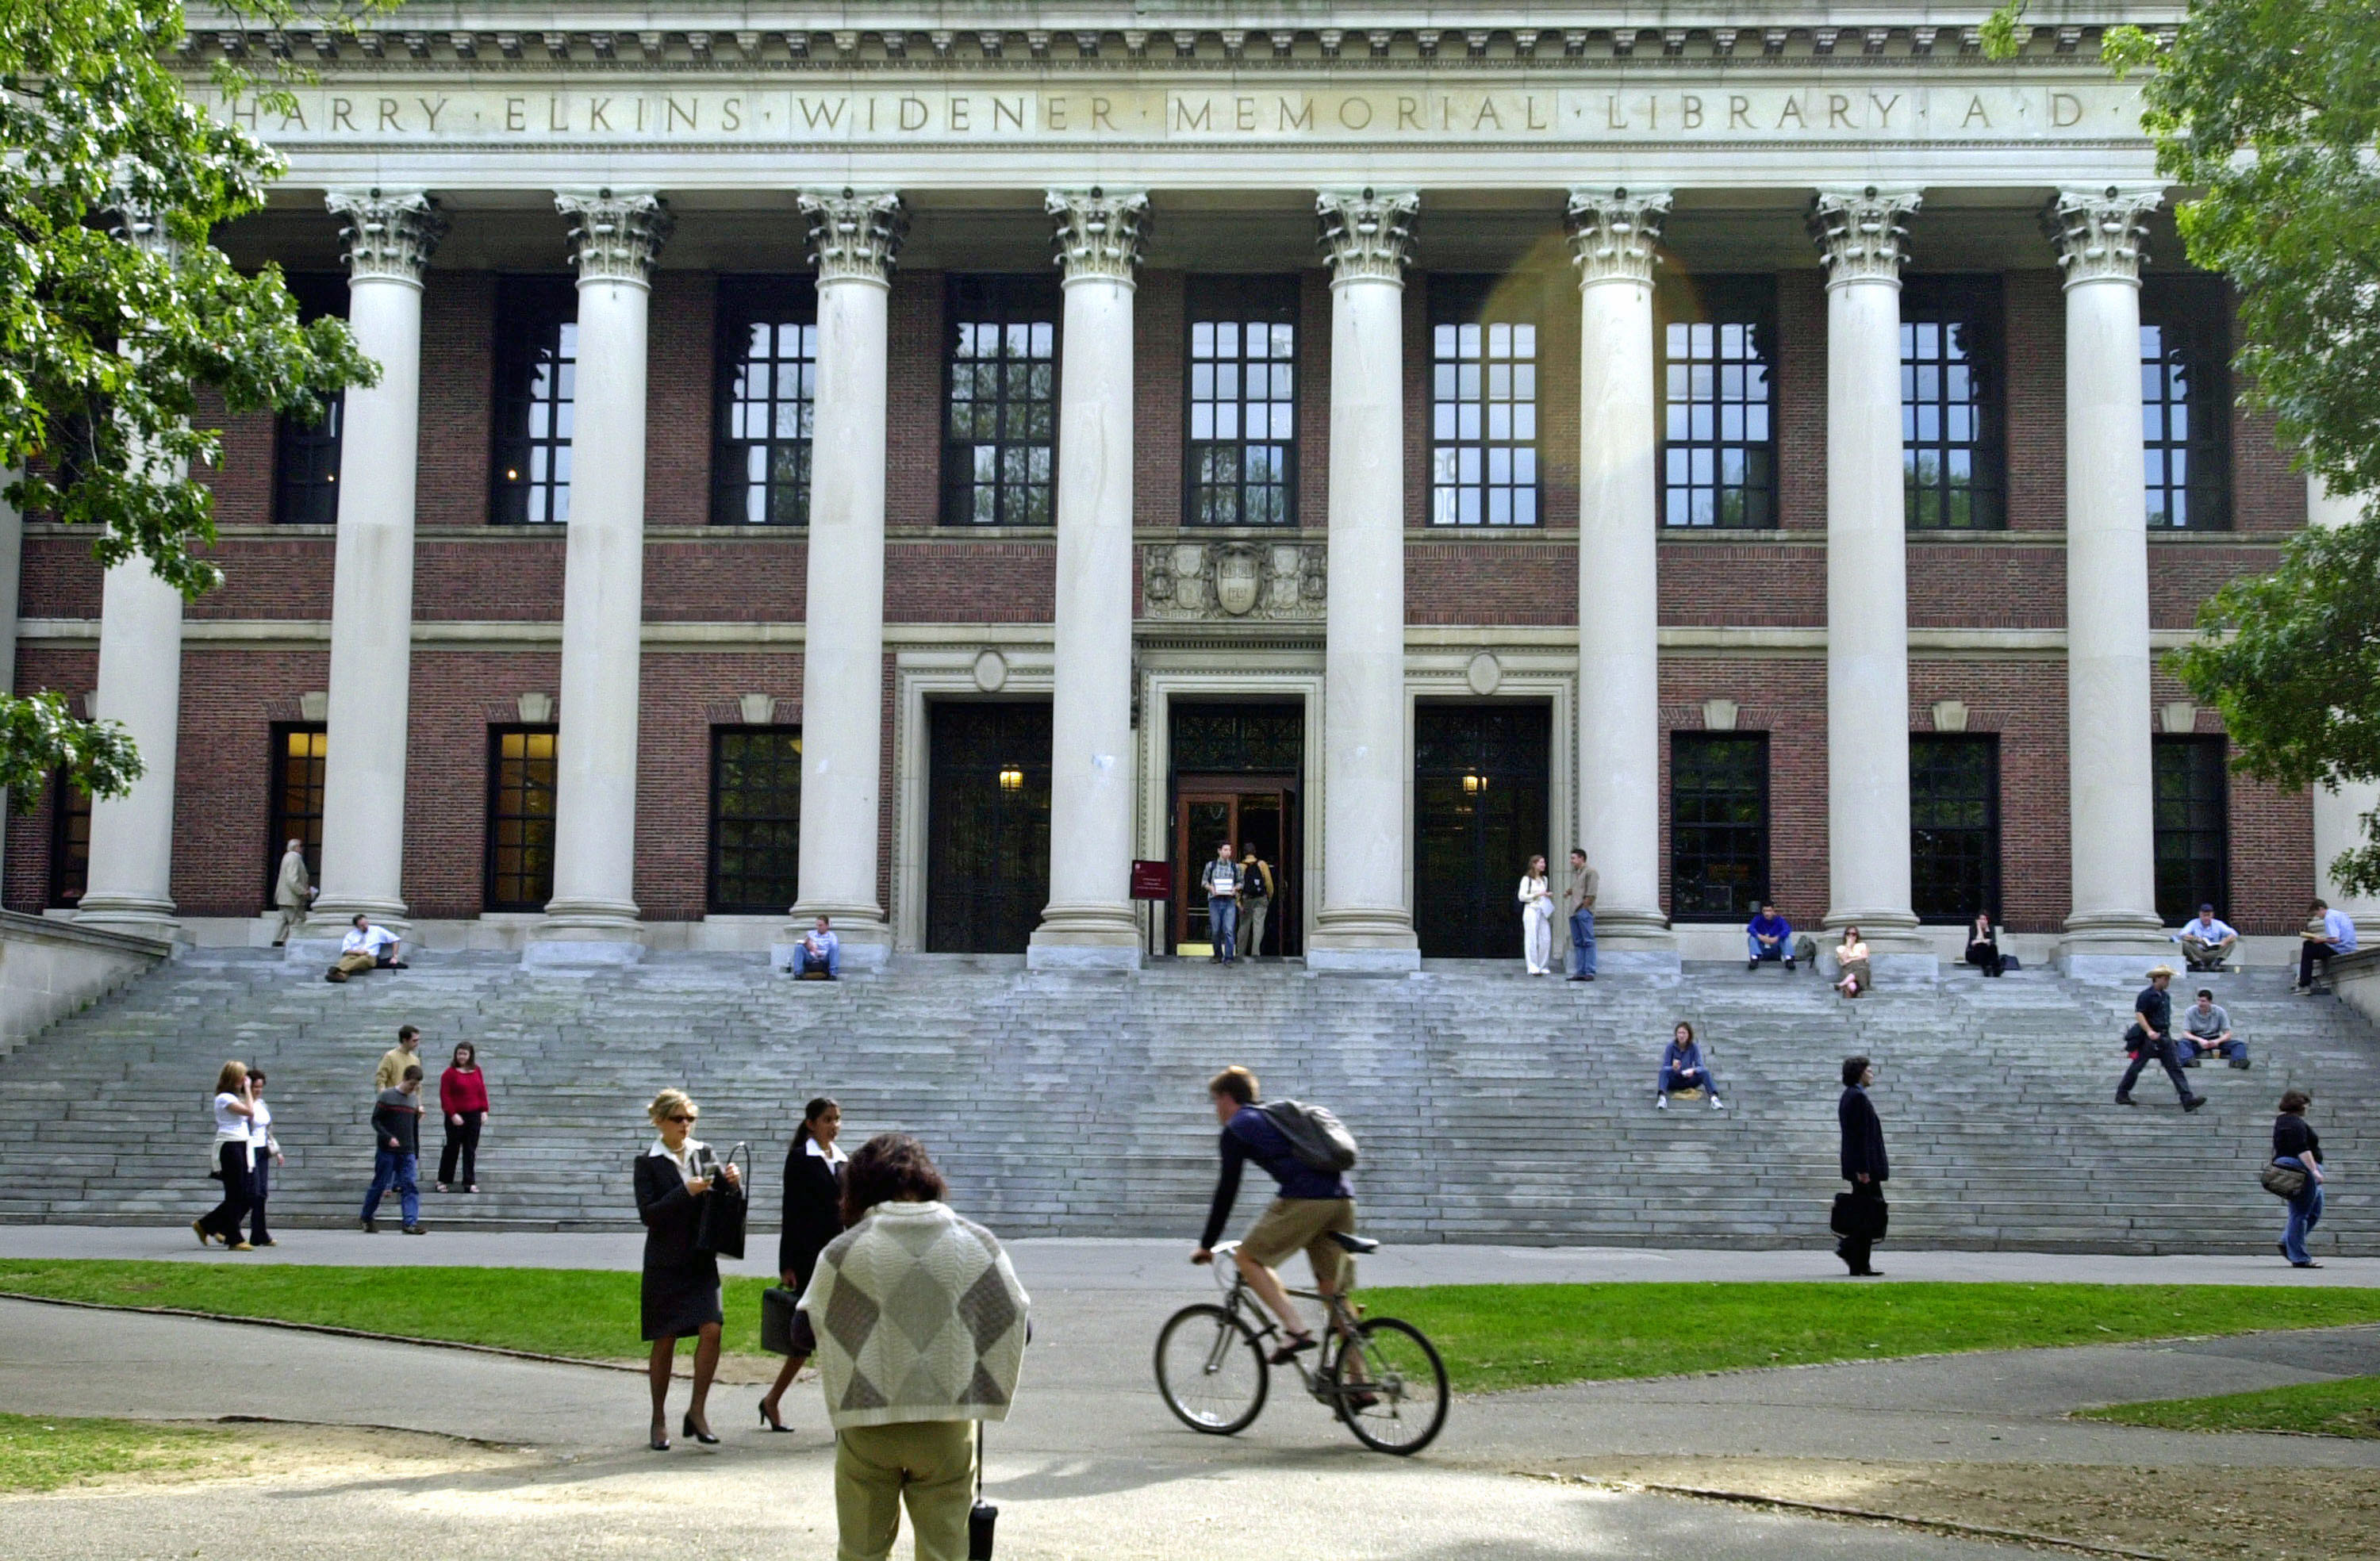 Students walking around Harvard's Larry Elkins Widener Memorial Library, a setting for Margaret Atwood's book 'The Handmaid's Tale'